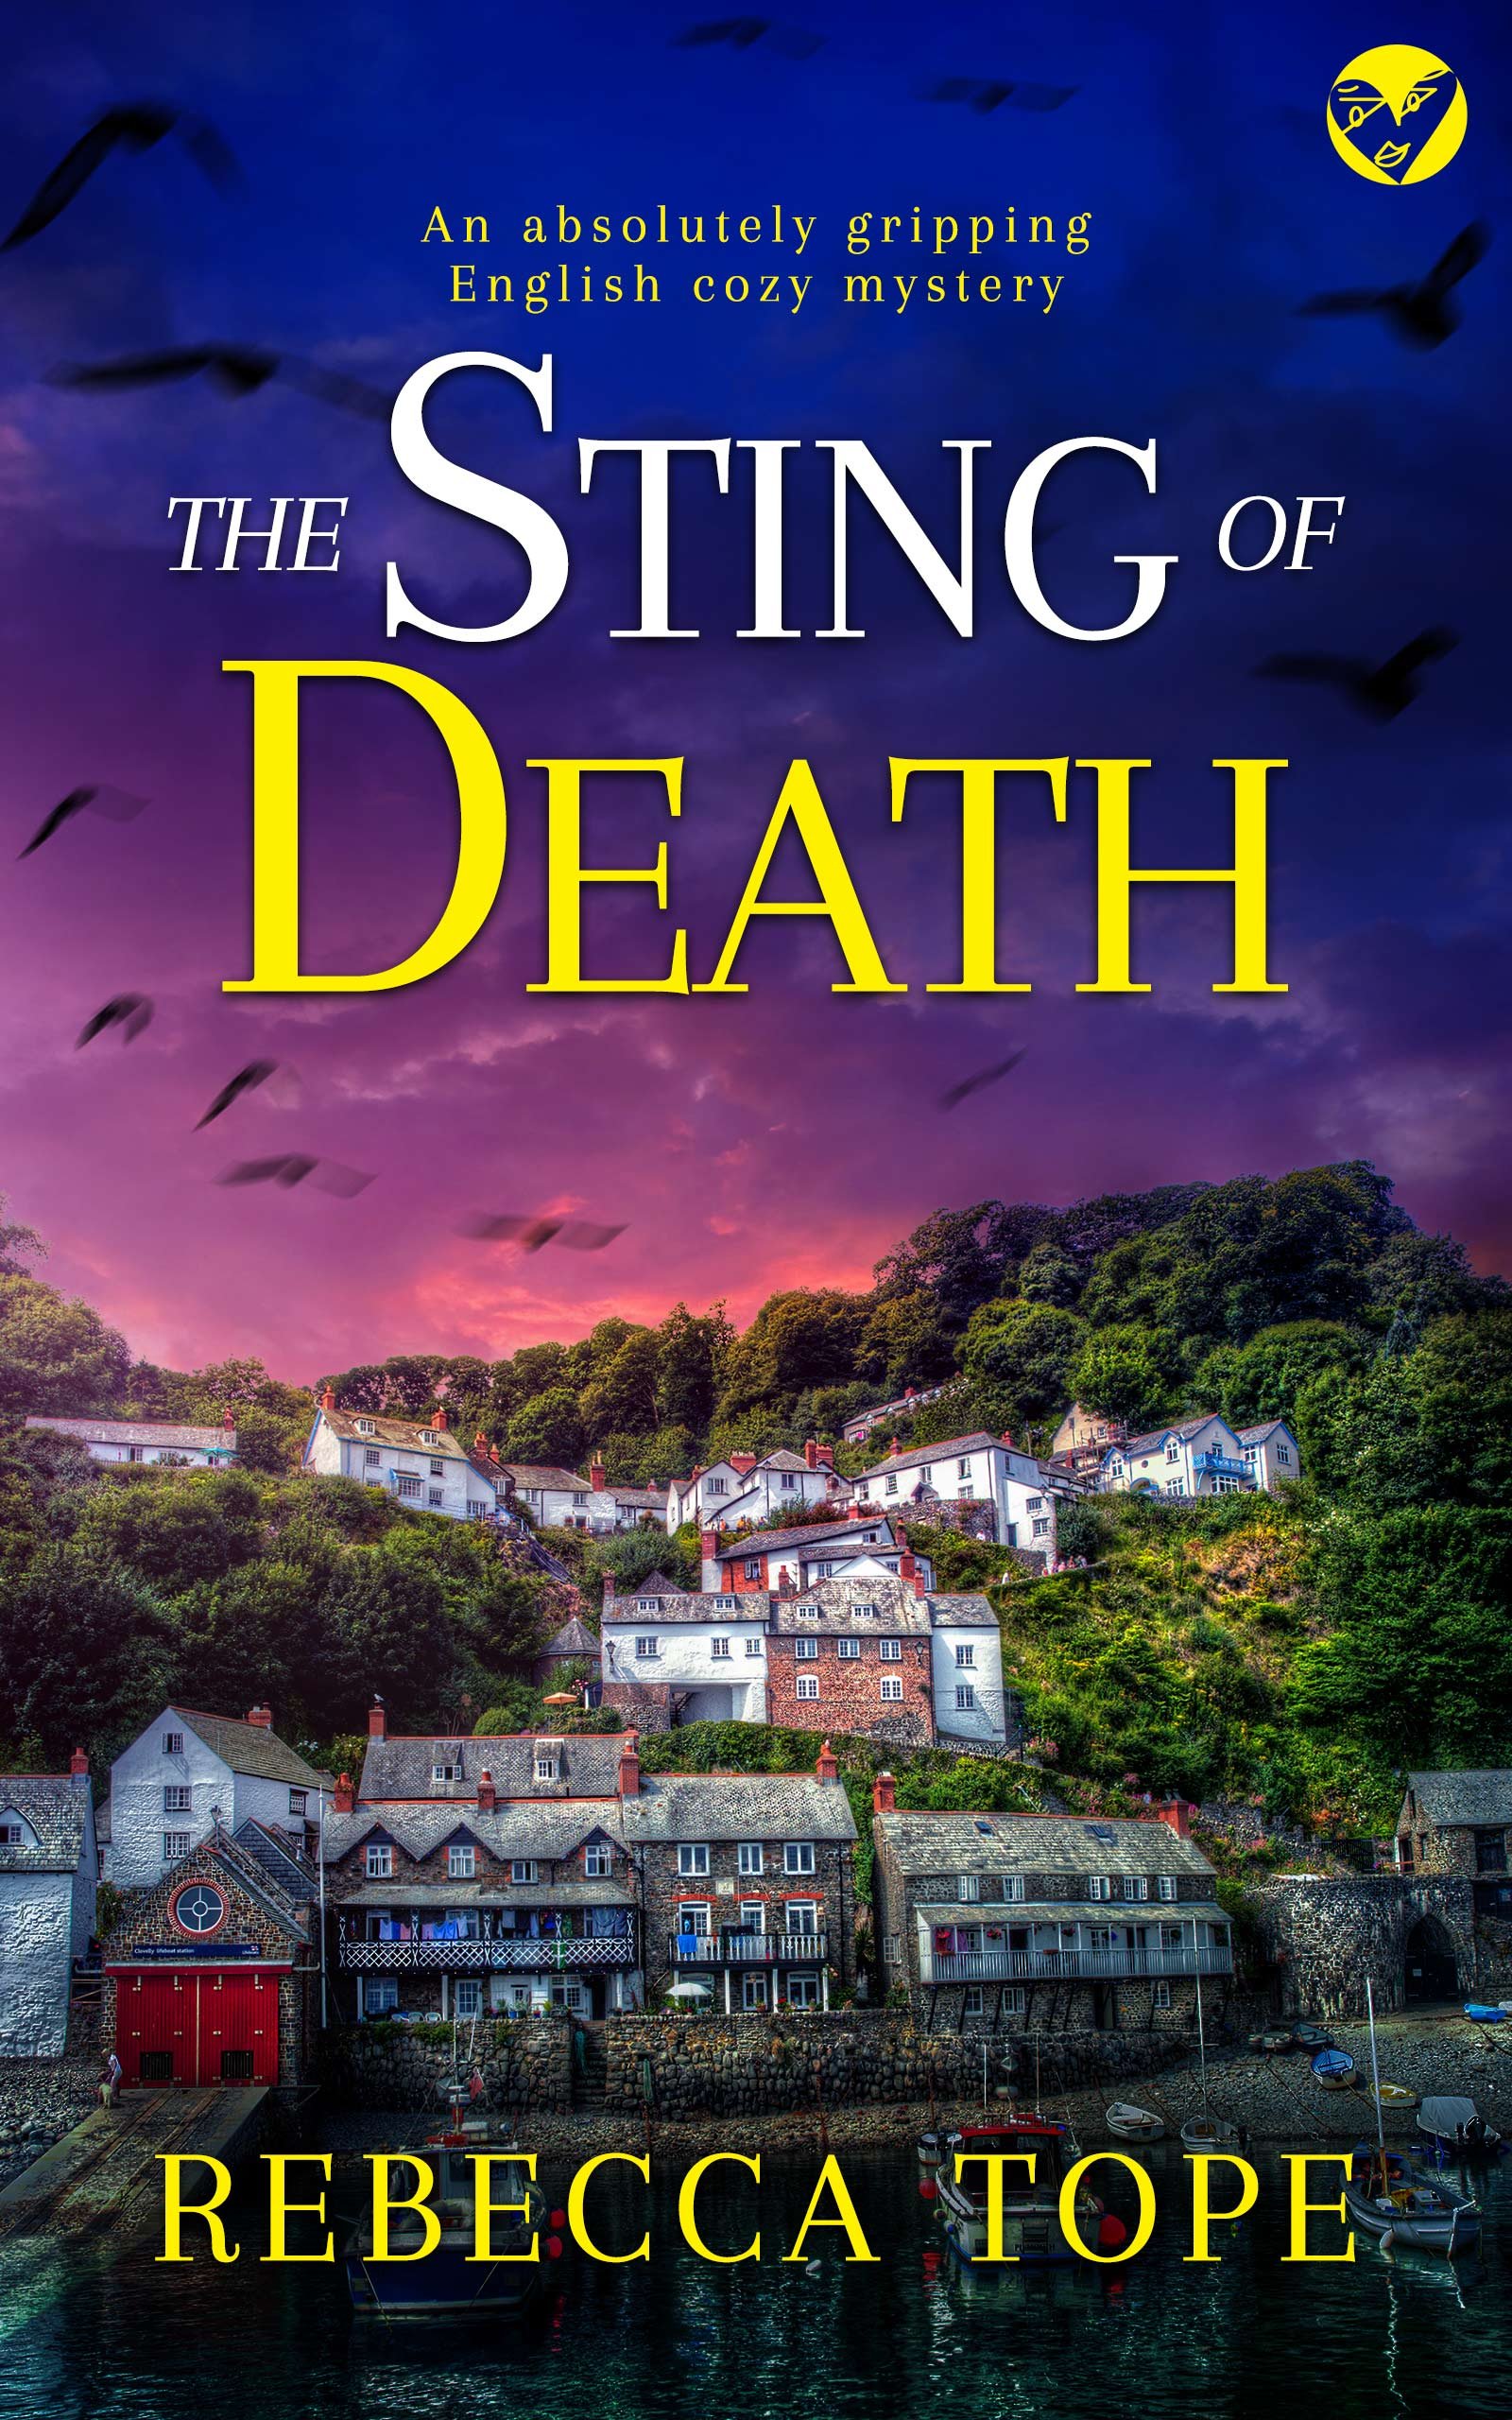 THE STING OF DEATH Cover publish 598KB.jpg